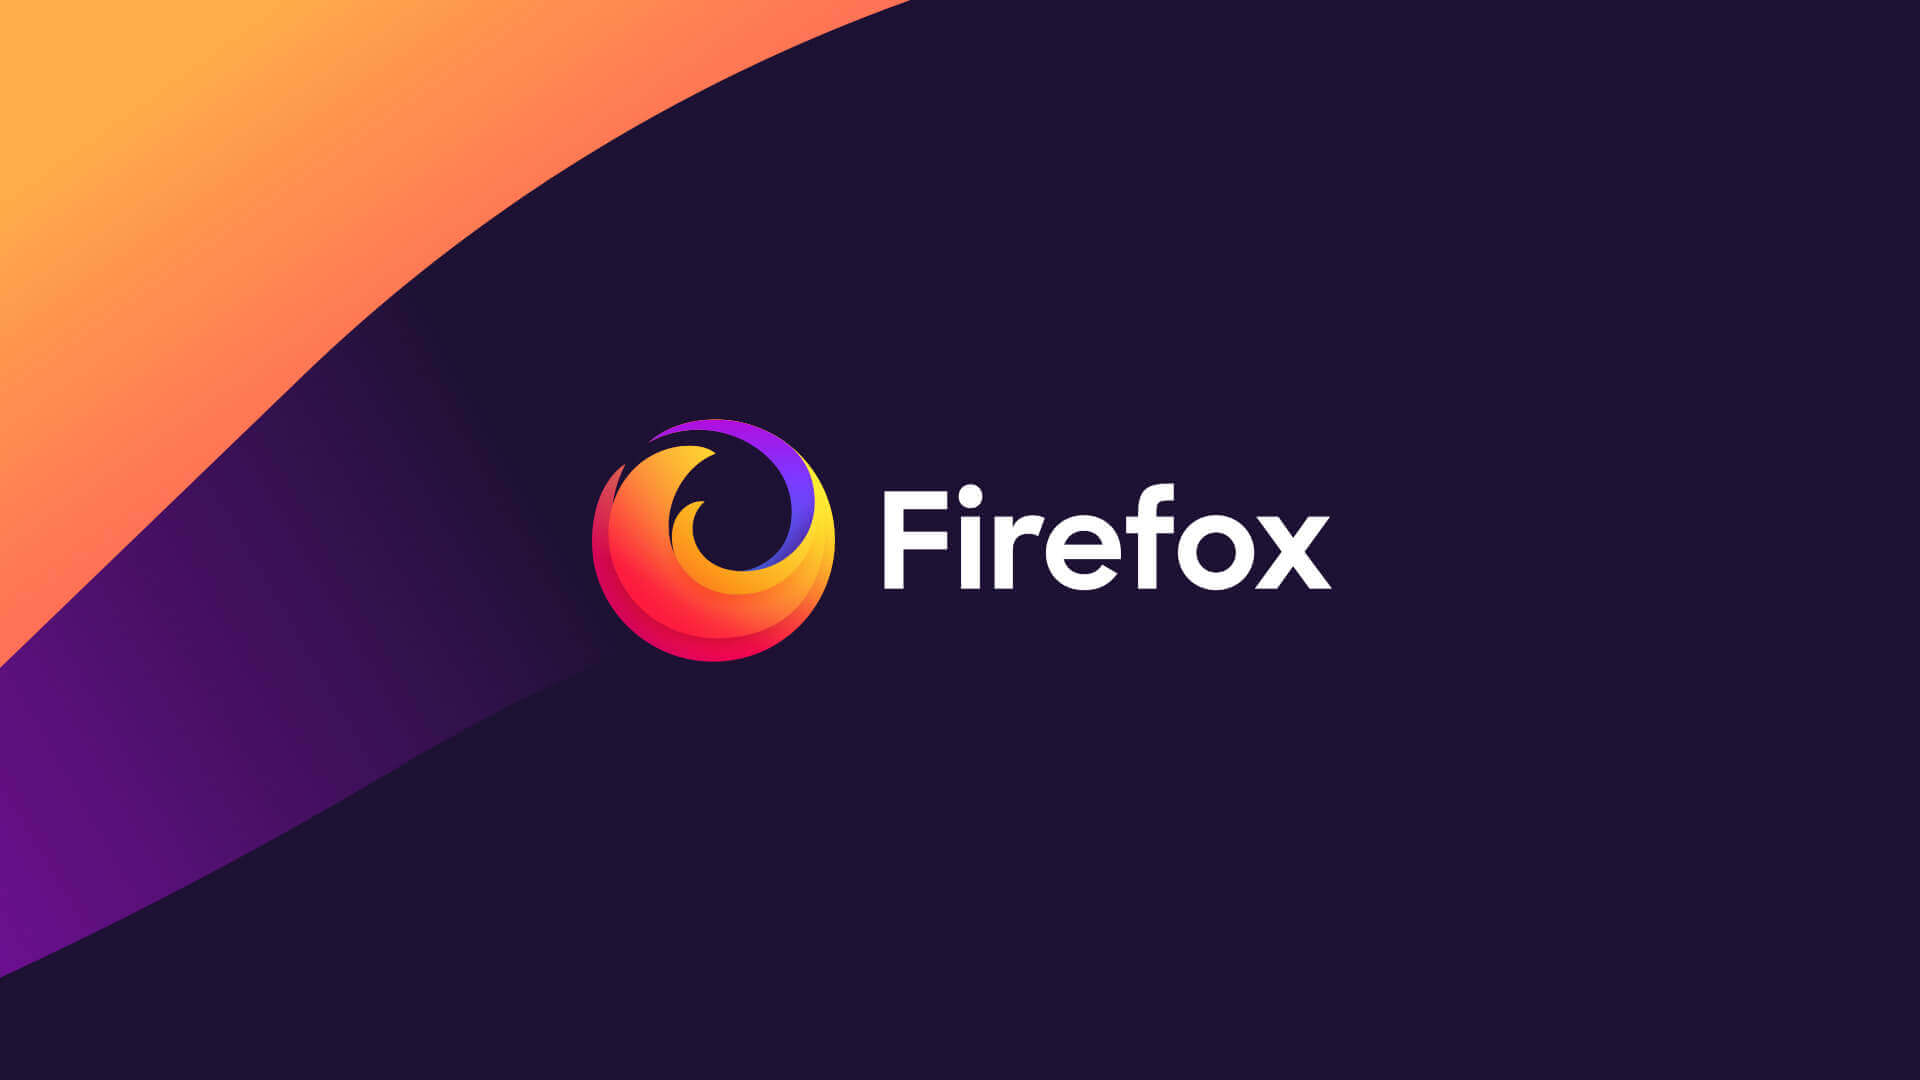 Firefox gets new privacy-focused features!